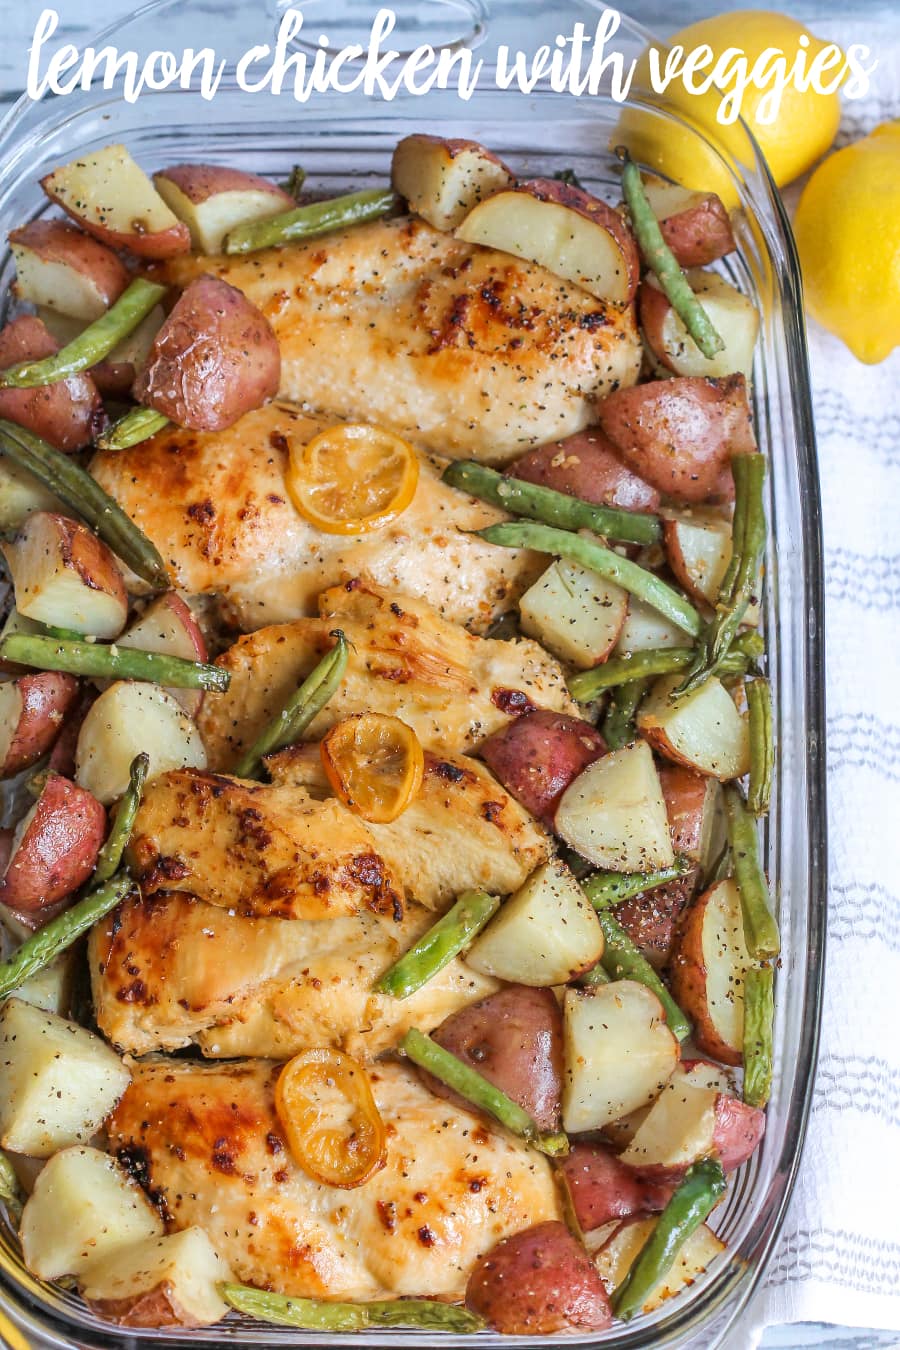 Roasted Lemon Chicken with Veggies including green beans and red potatoes. One of the easiest and yummiest dinner recipes!